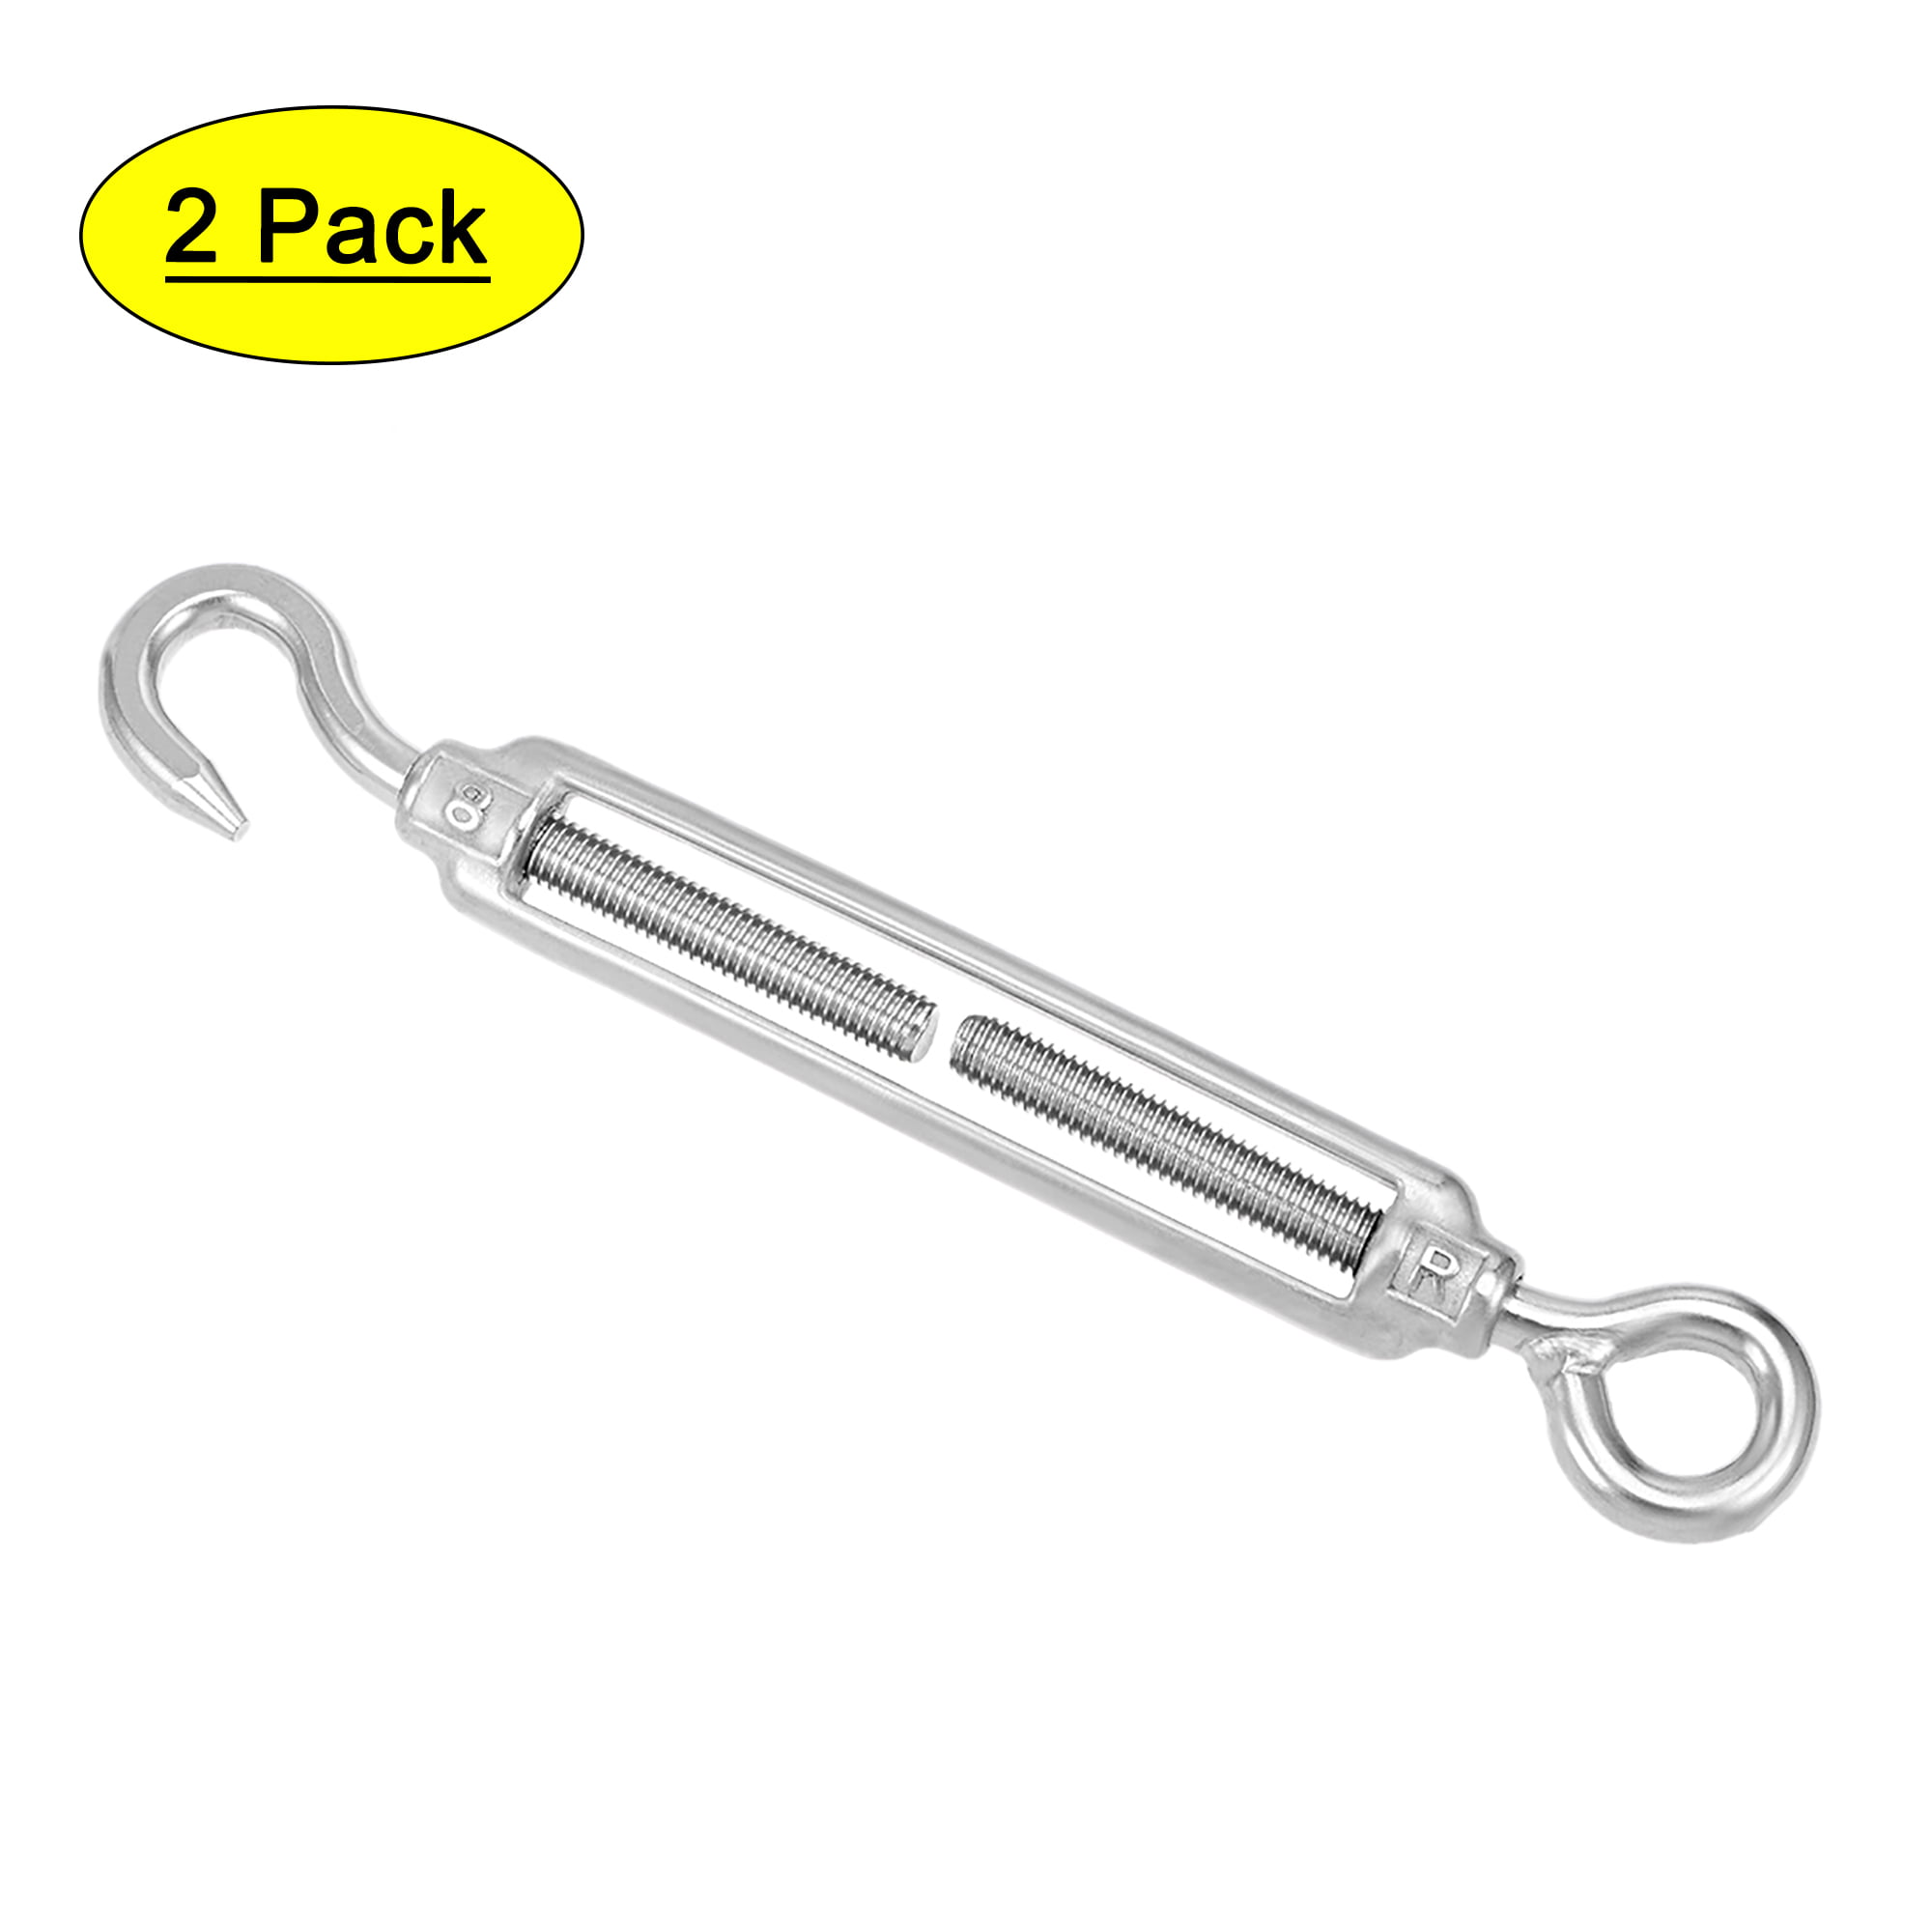 Unique Bargains M8 Stainless Steel 304 Hook & Eye Turnbuckle Wire Rope 2pcs  